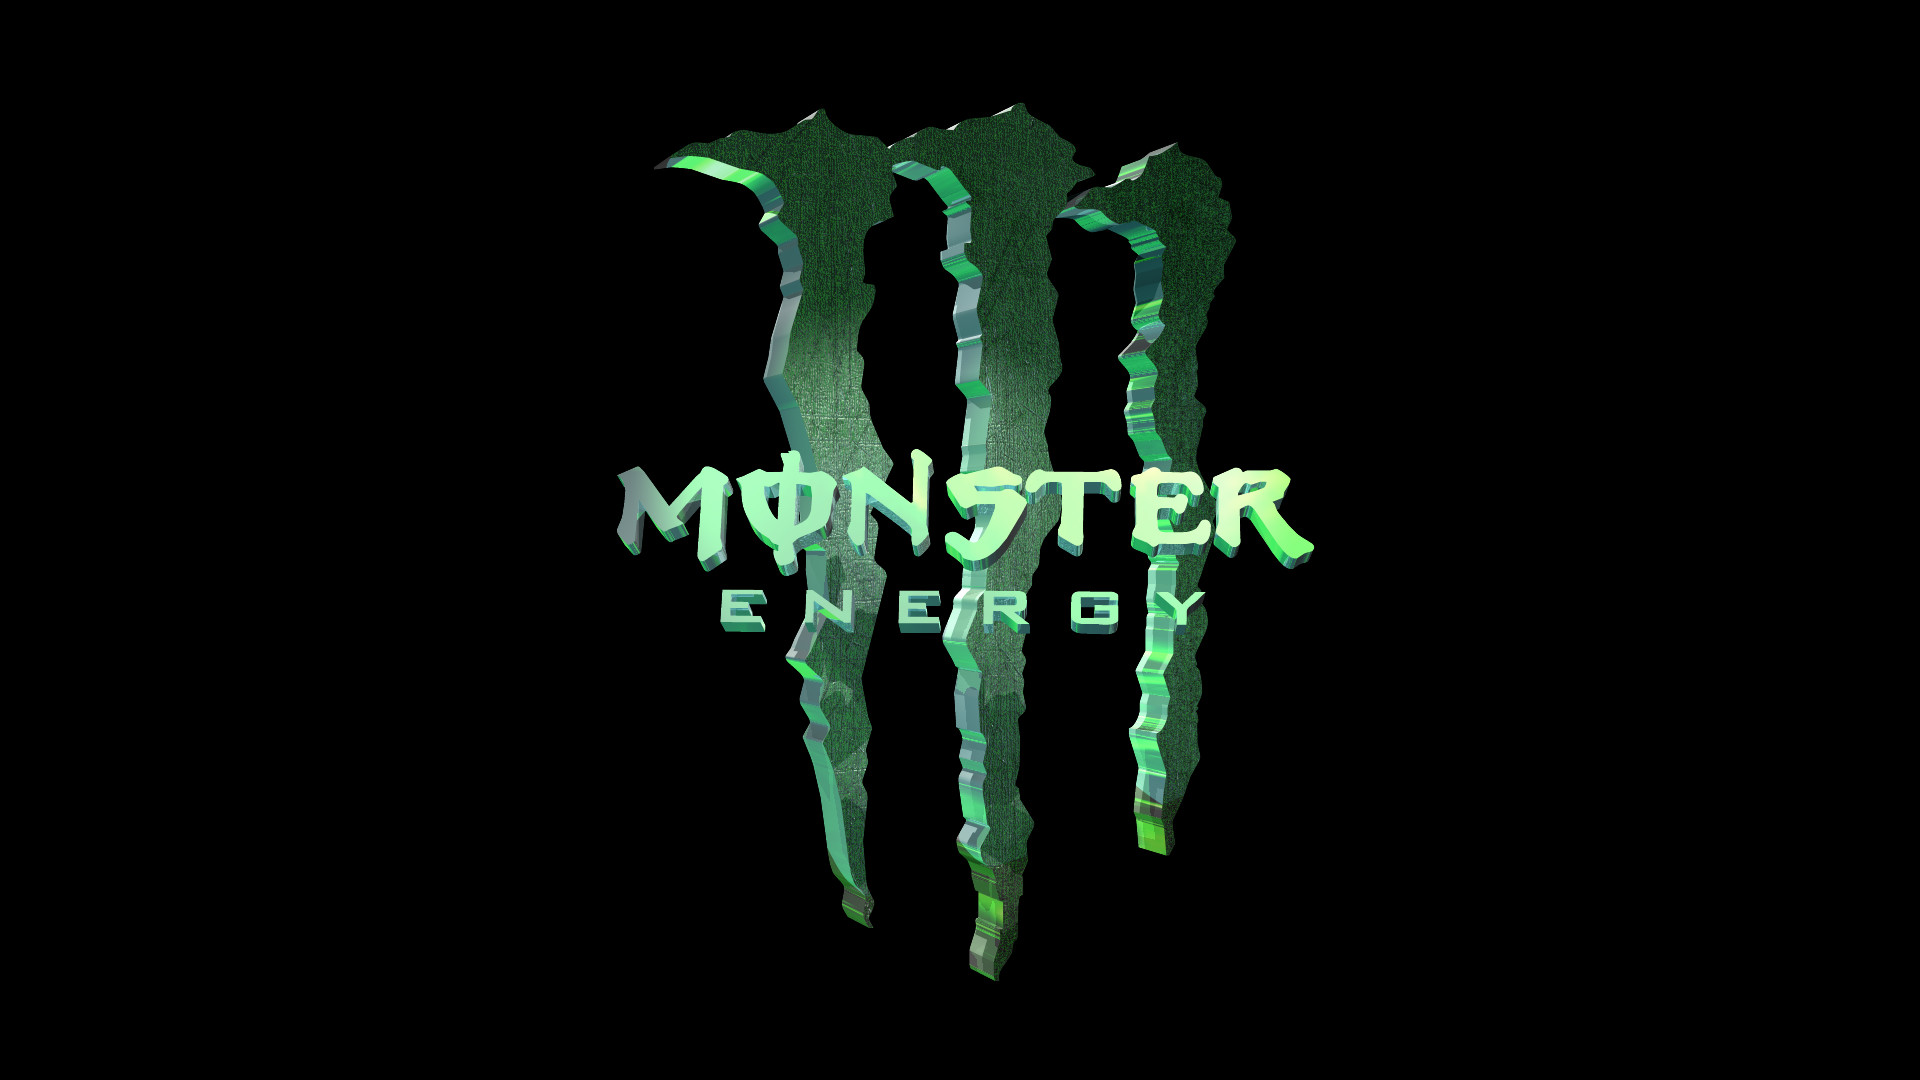 1920x1080 Monster Energy Drink ID: 522683177 Wallpaper for Free - Best High  Resolution Images